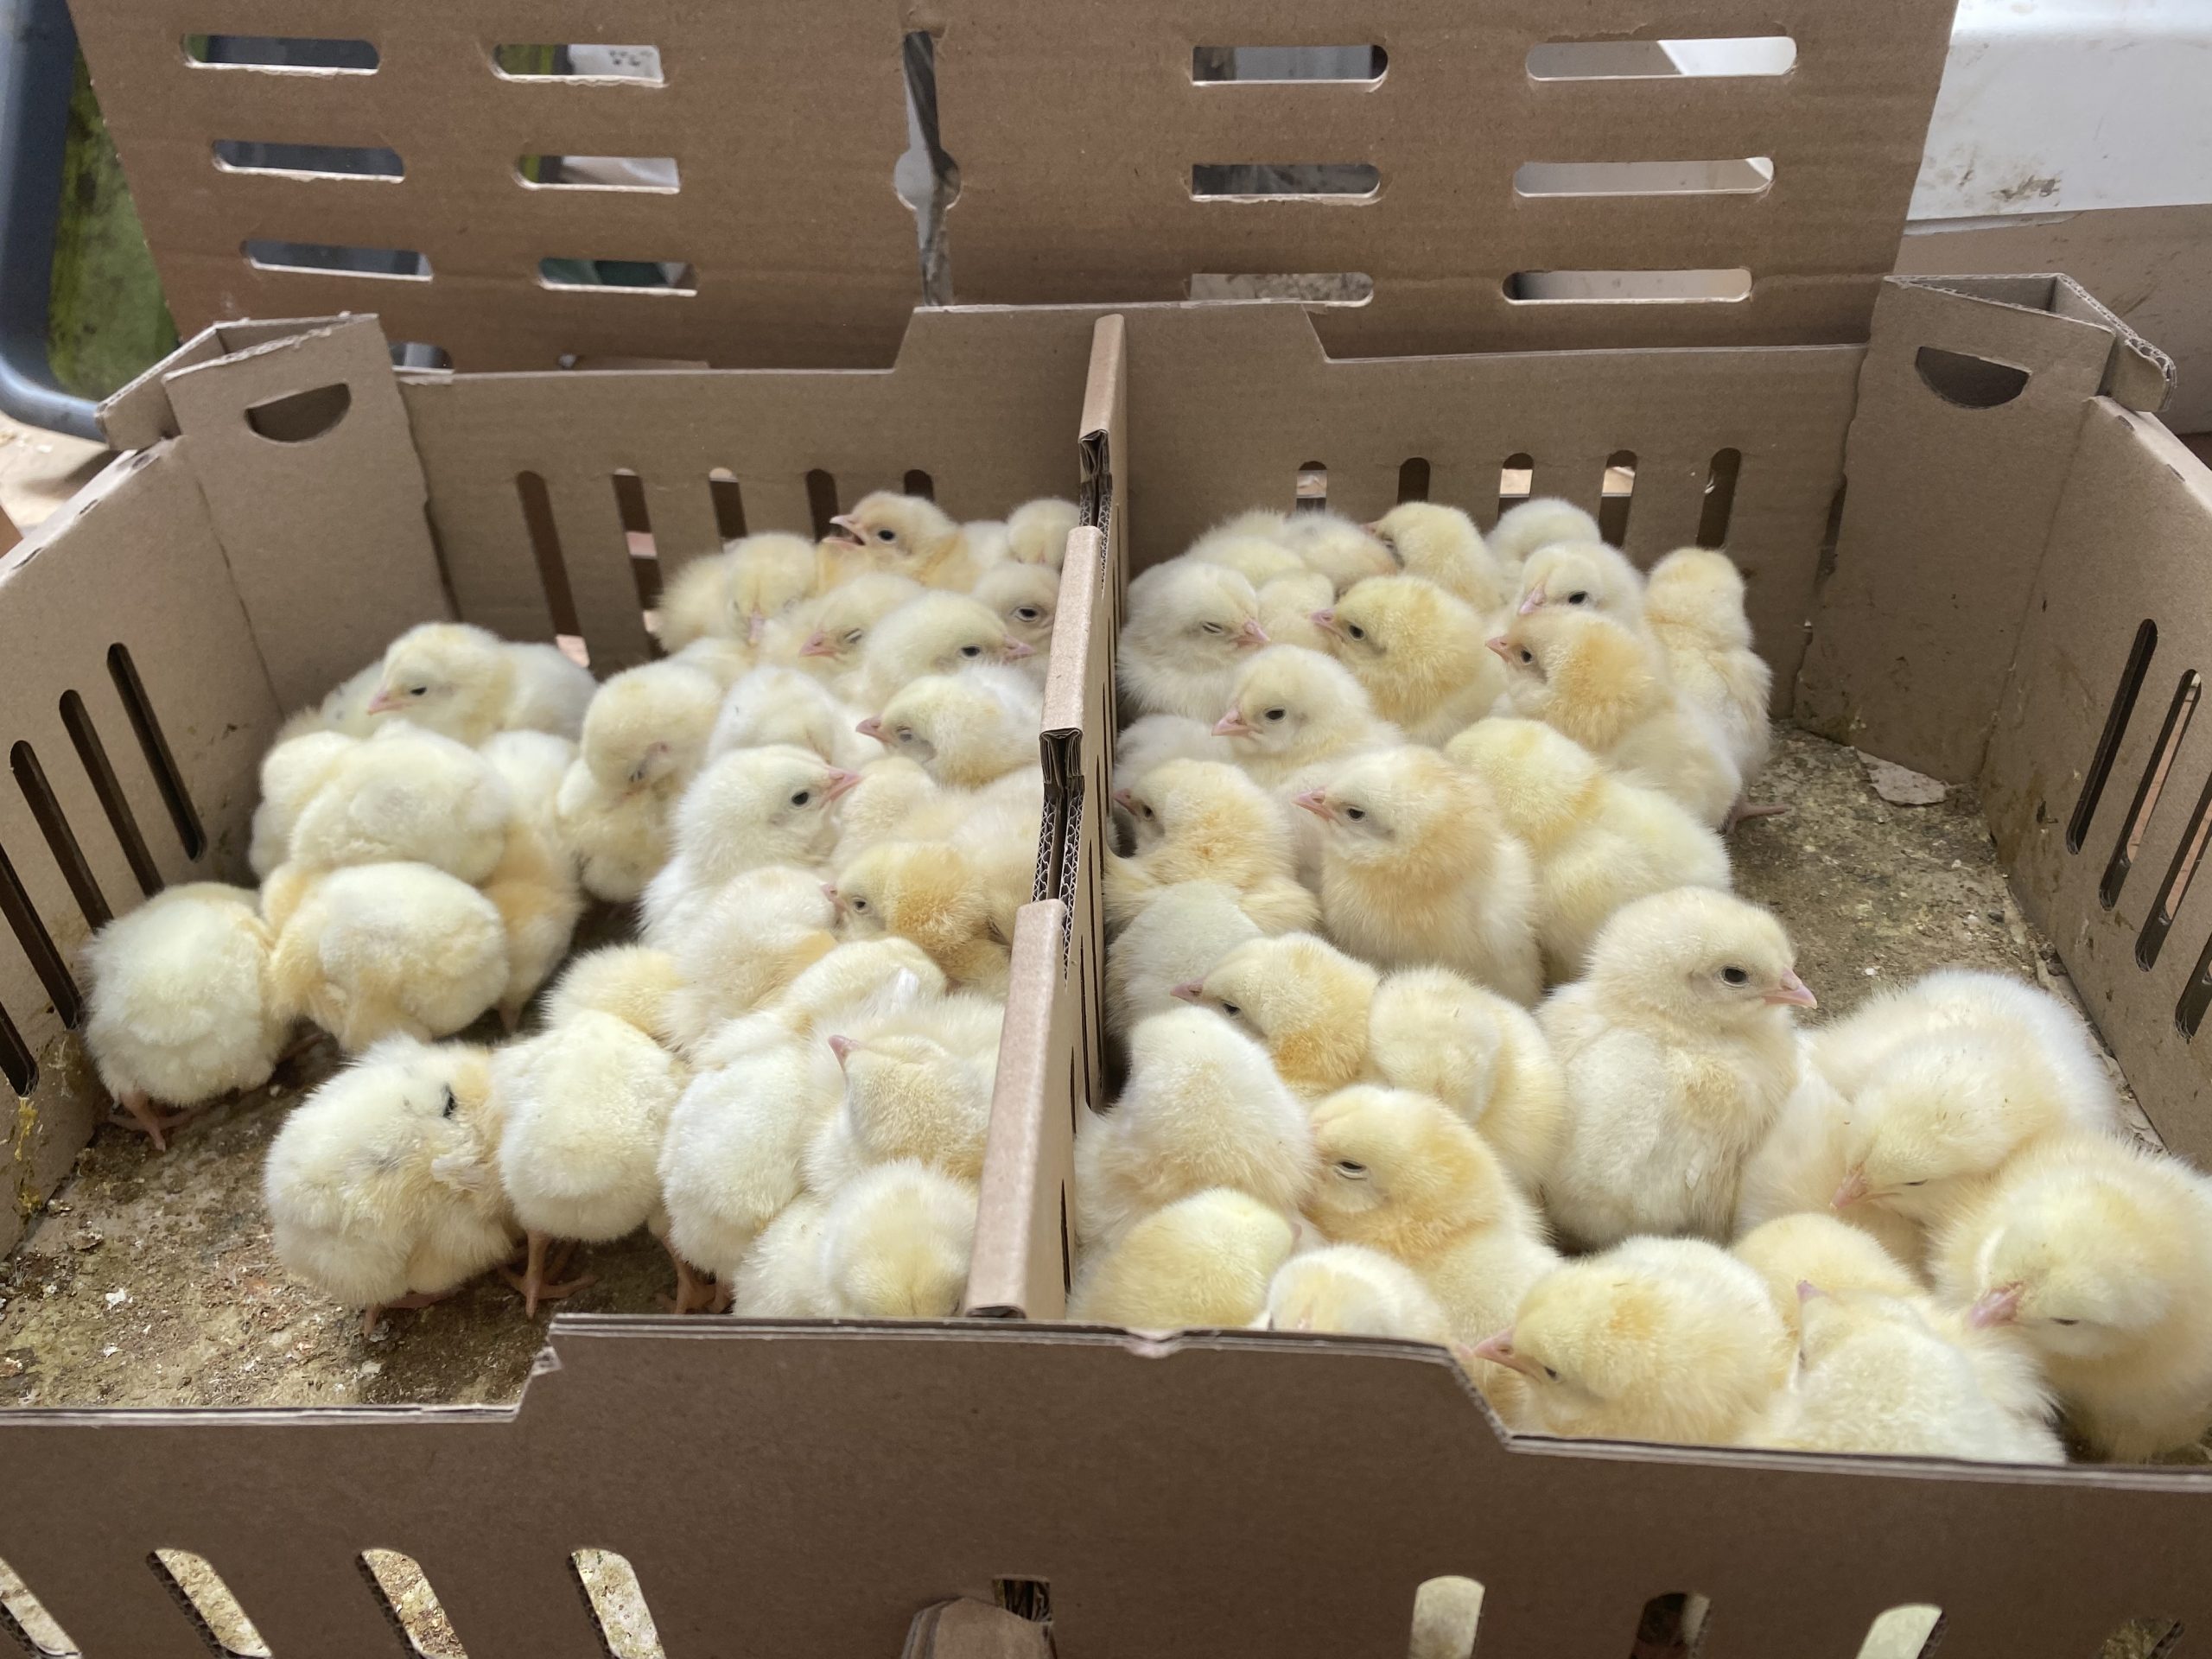 Raising Meat Chickens For Eating - The Free Range Way